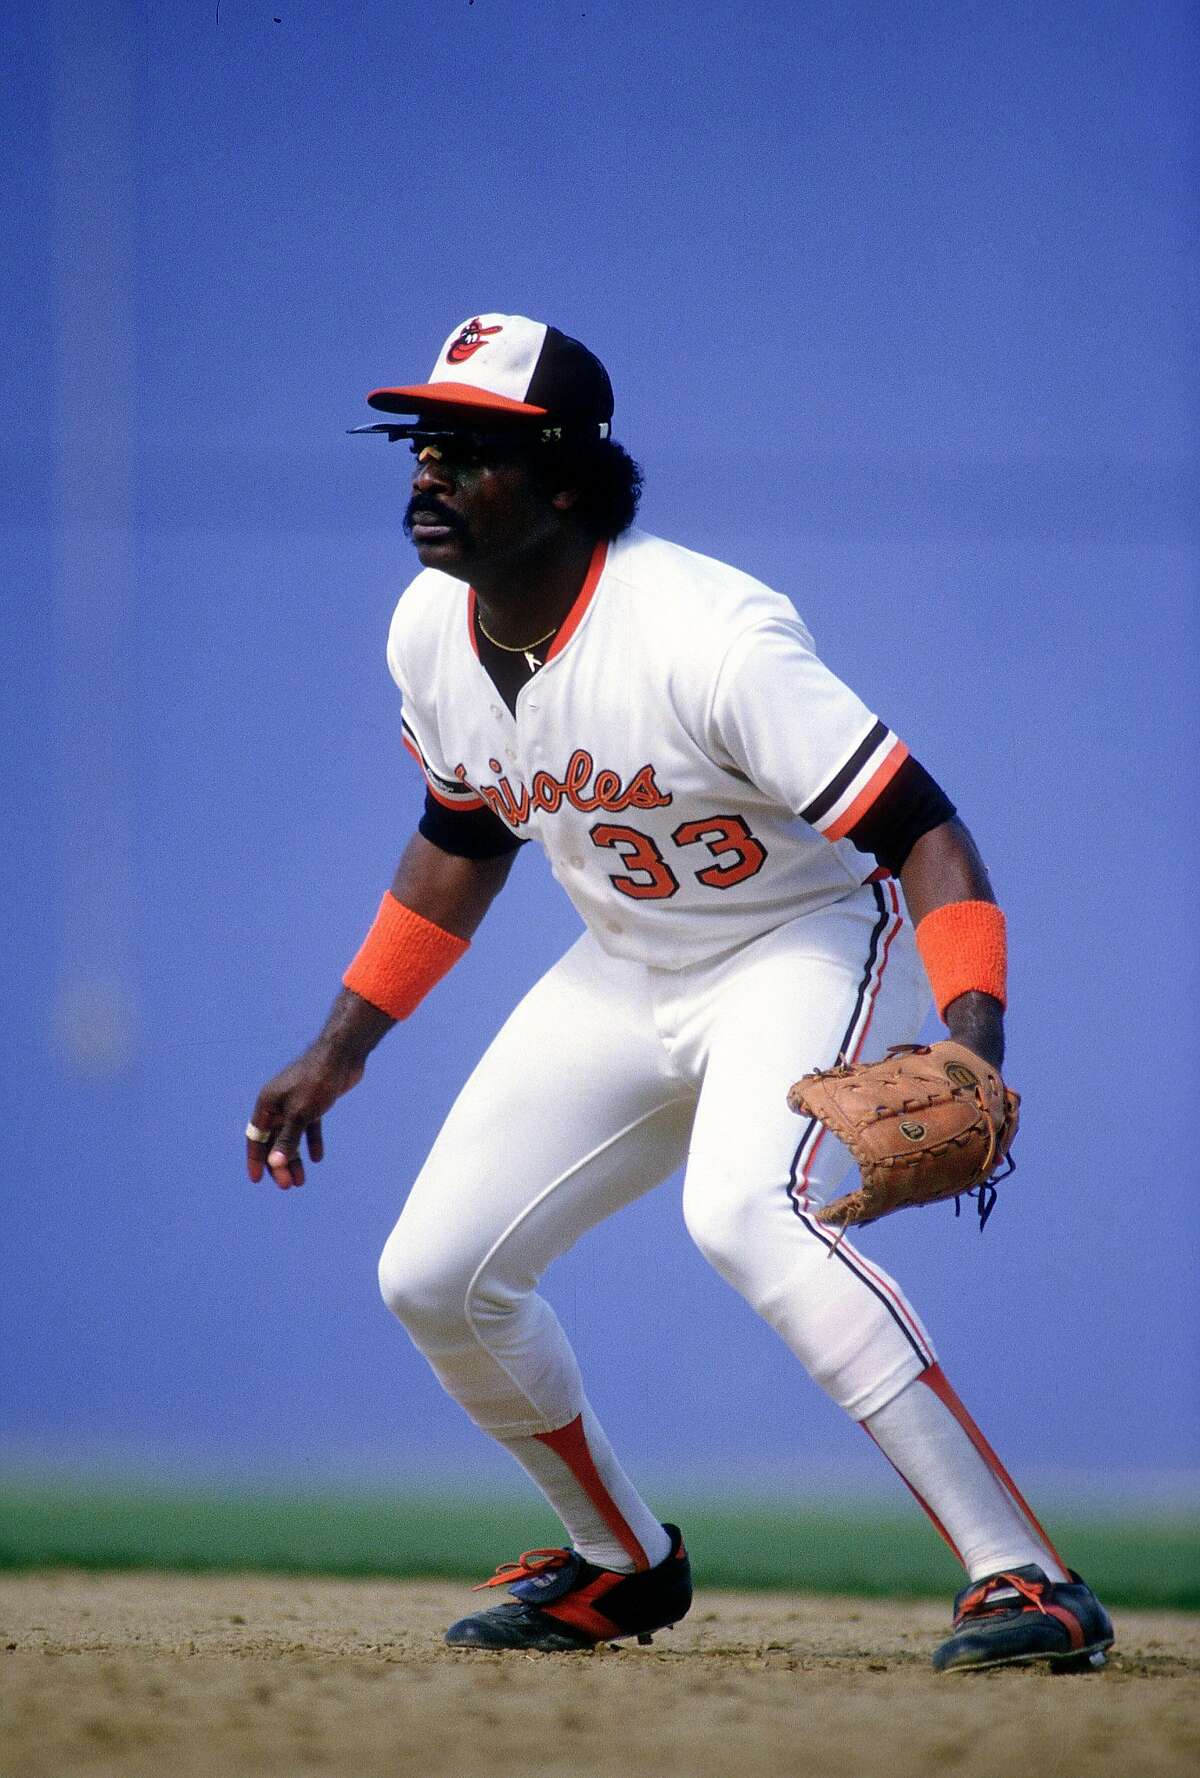 BALTIMORE, MD - CIRCA 1987: First baseman Eddie Murray #33 of the Baltimore Orioles in action during an Major League Baseball game circa 1987 at Memorial Stadium in Baltimore, Maryland. Murray played for the Orioles from 1977-88 and 1996.